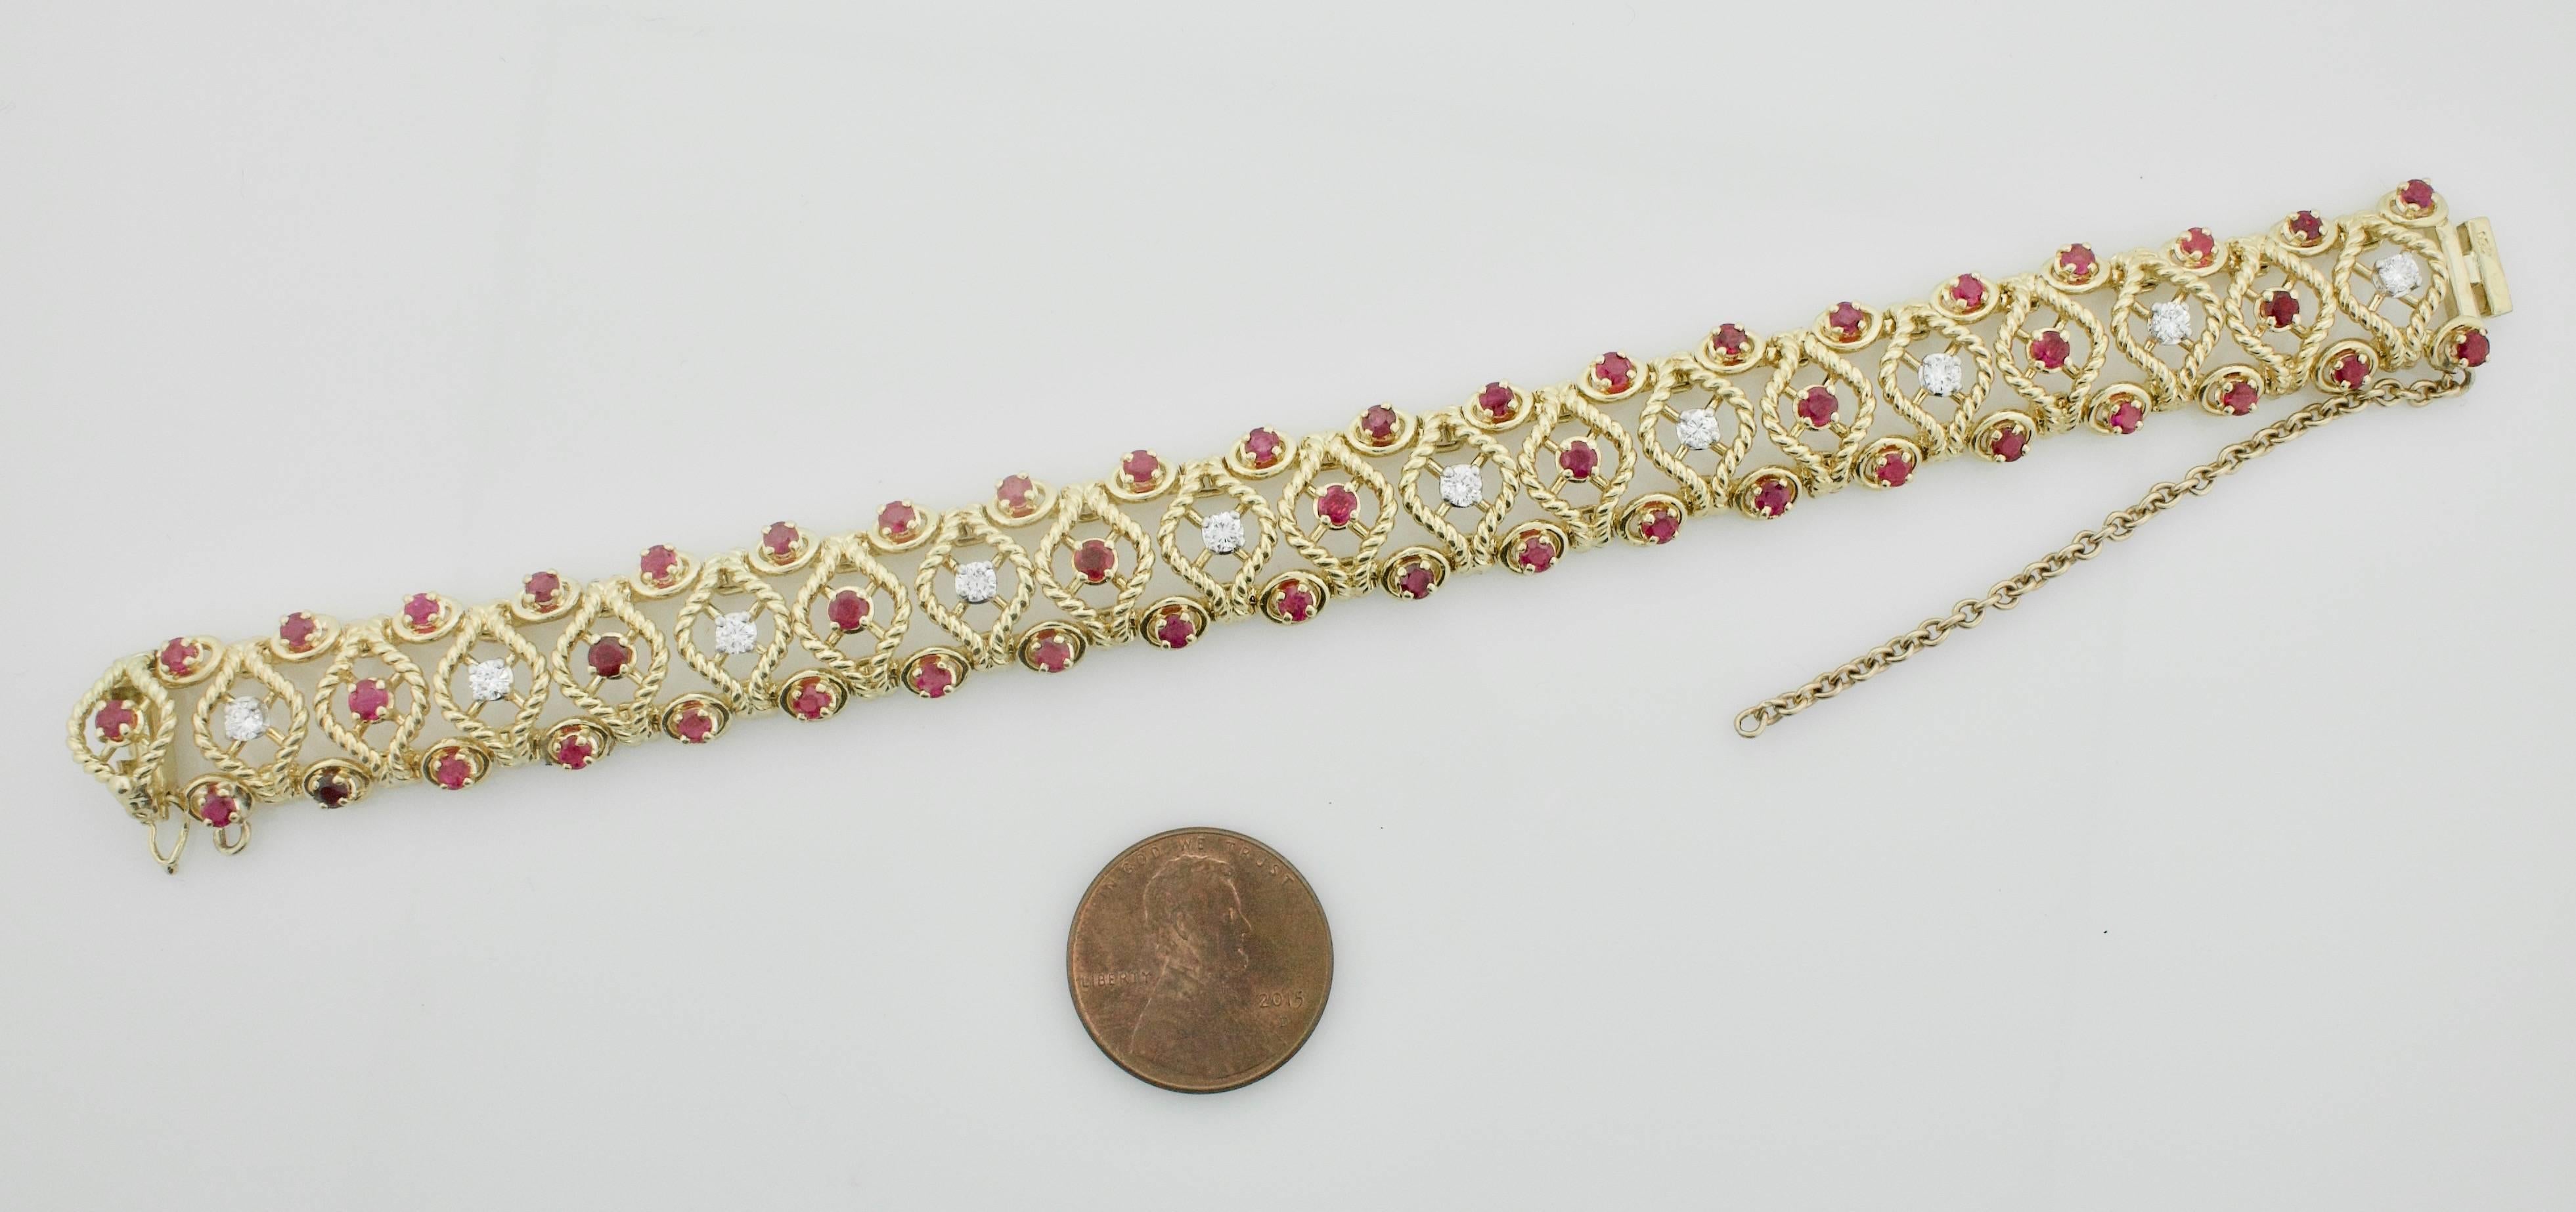 Gubelin Ruby and Diamond Bracelet in 18k Yellow Gold Circa 1950's
Ten Round Brilliant Cut Diamonds weighing .75 carats approximately  GH VVS-VS1 (very fine)
Fifty Round Rubies weighing 4.50 carats approximately Red and VibrantStamped Gublin with